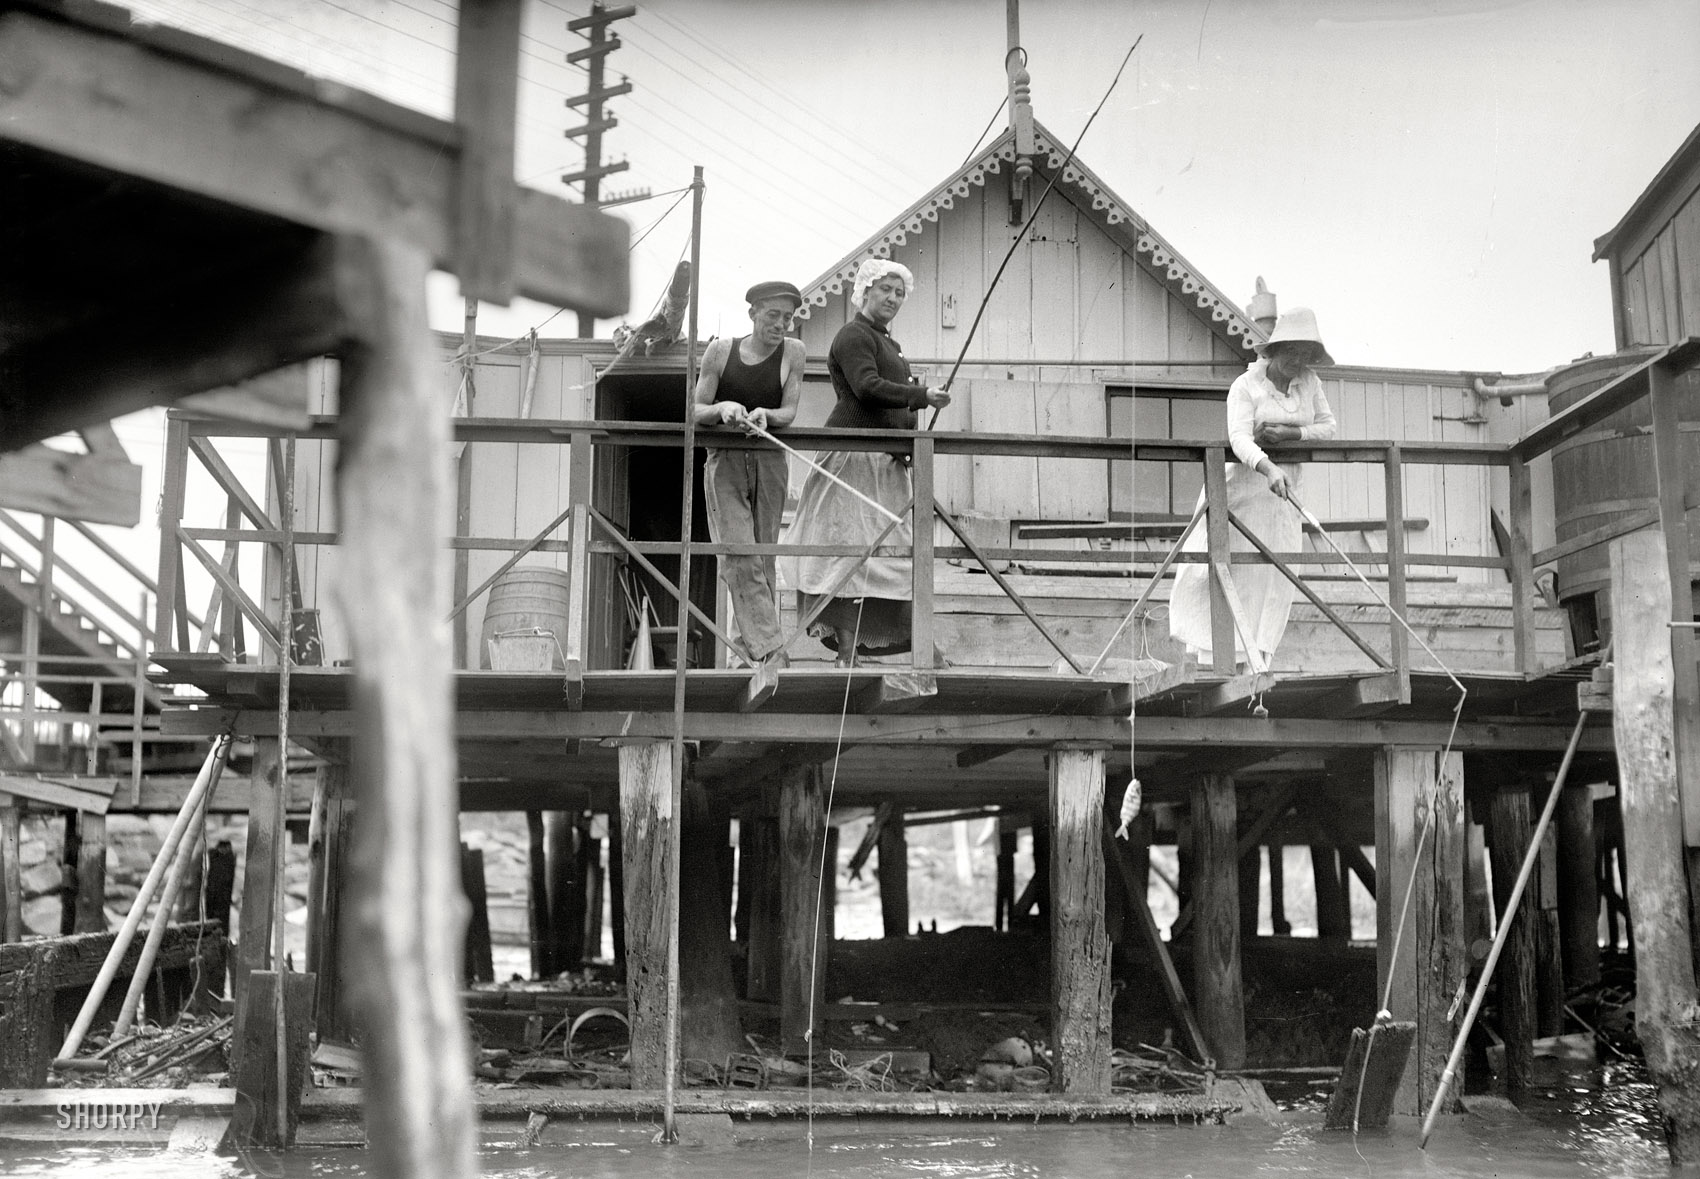 Queens County, New York, circa 1915. "At Broad Channel -- fishing at your front door." 5x7 glass negative, George Grantham Bain Collection. View full size.